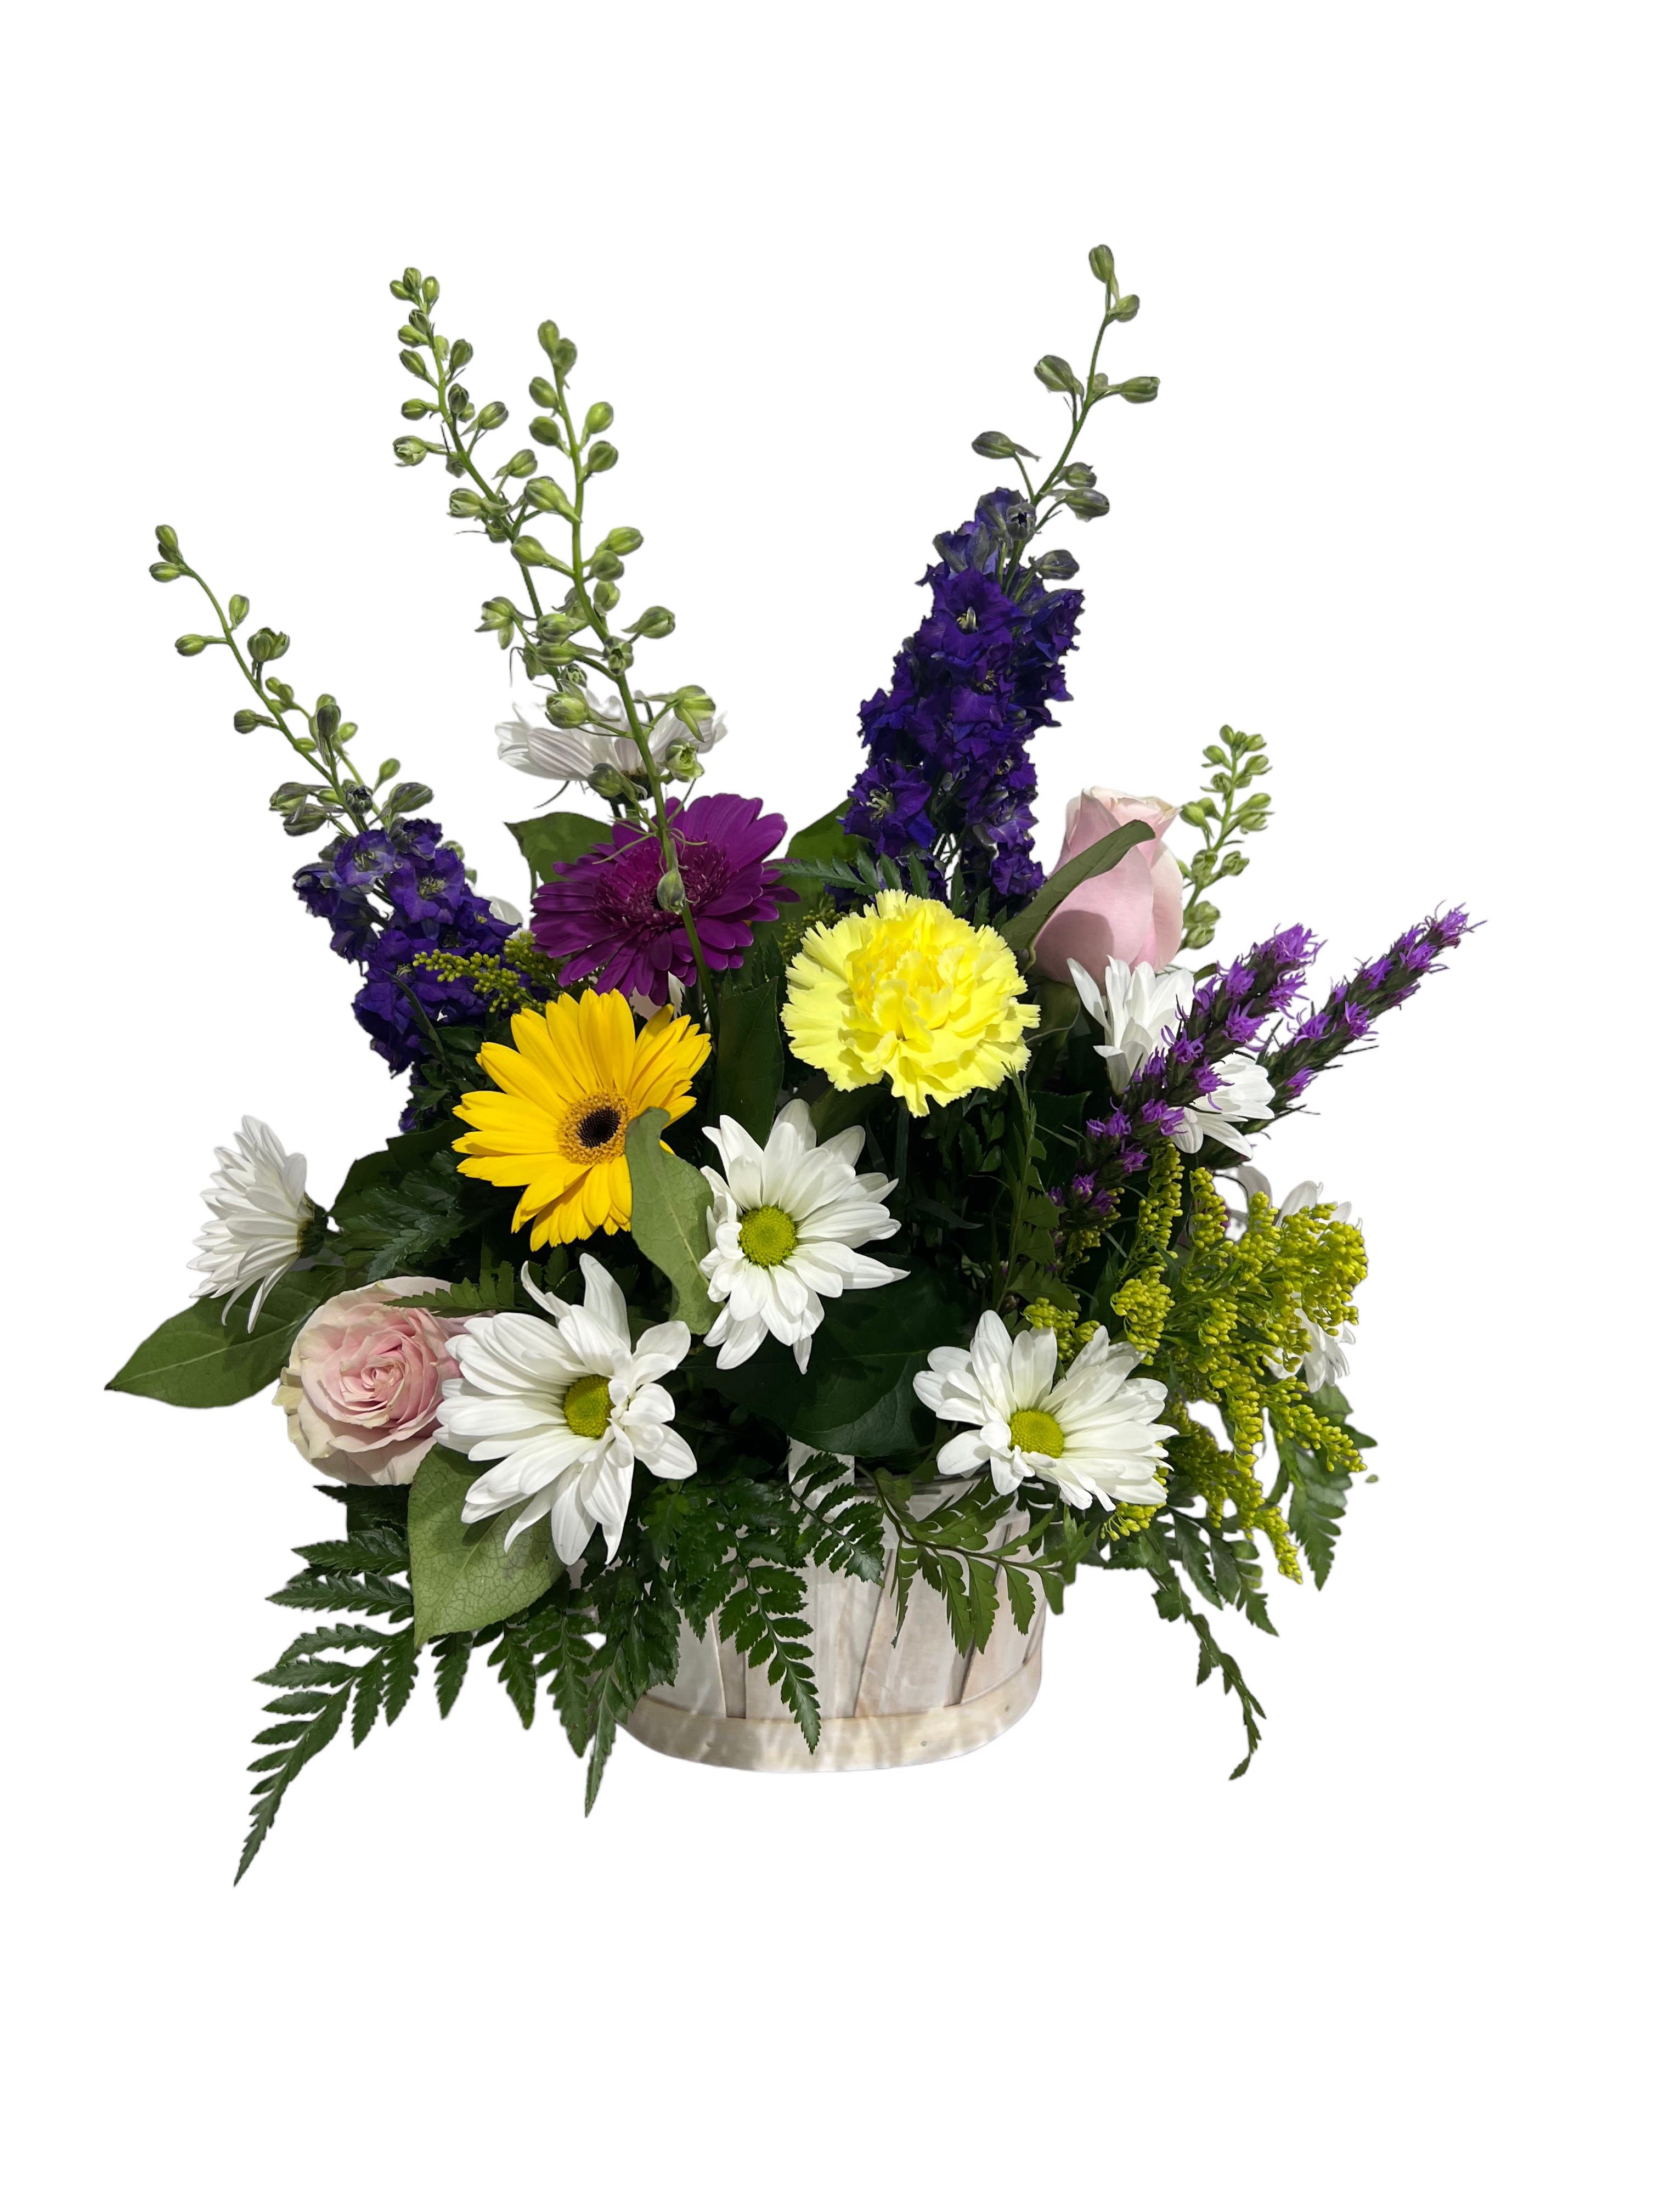 Enchanting Basket of Blooms - Fresh assortment of blooms arranged in a basket, using larkspur, gerbera daisies, carnations, daisies, roses and more 